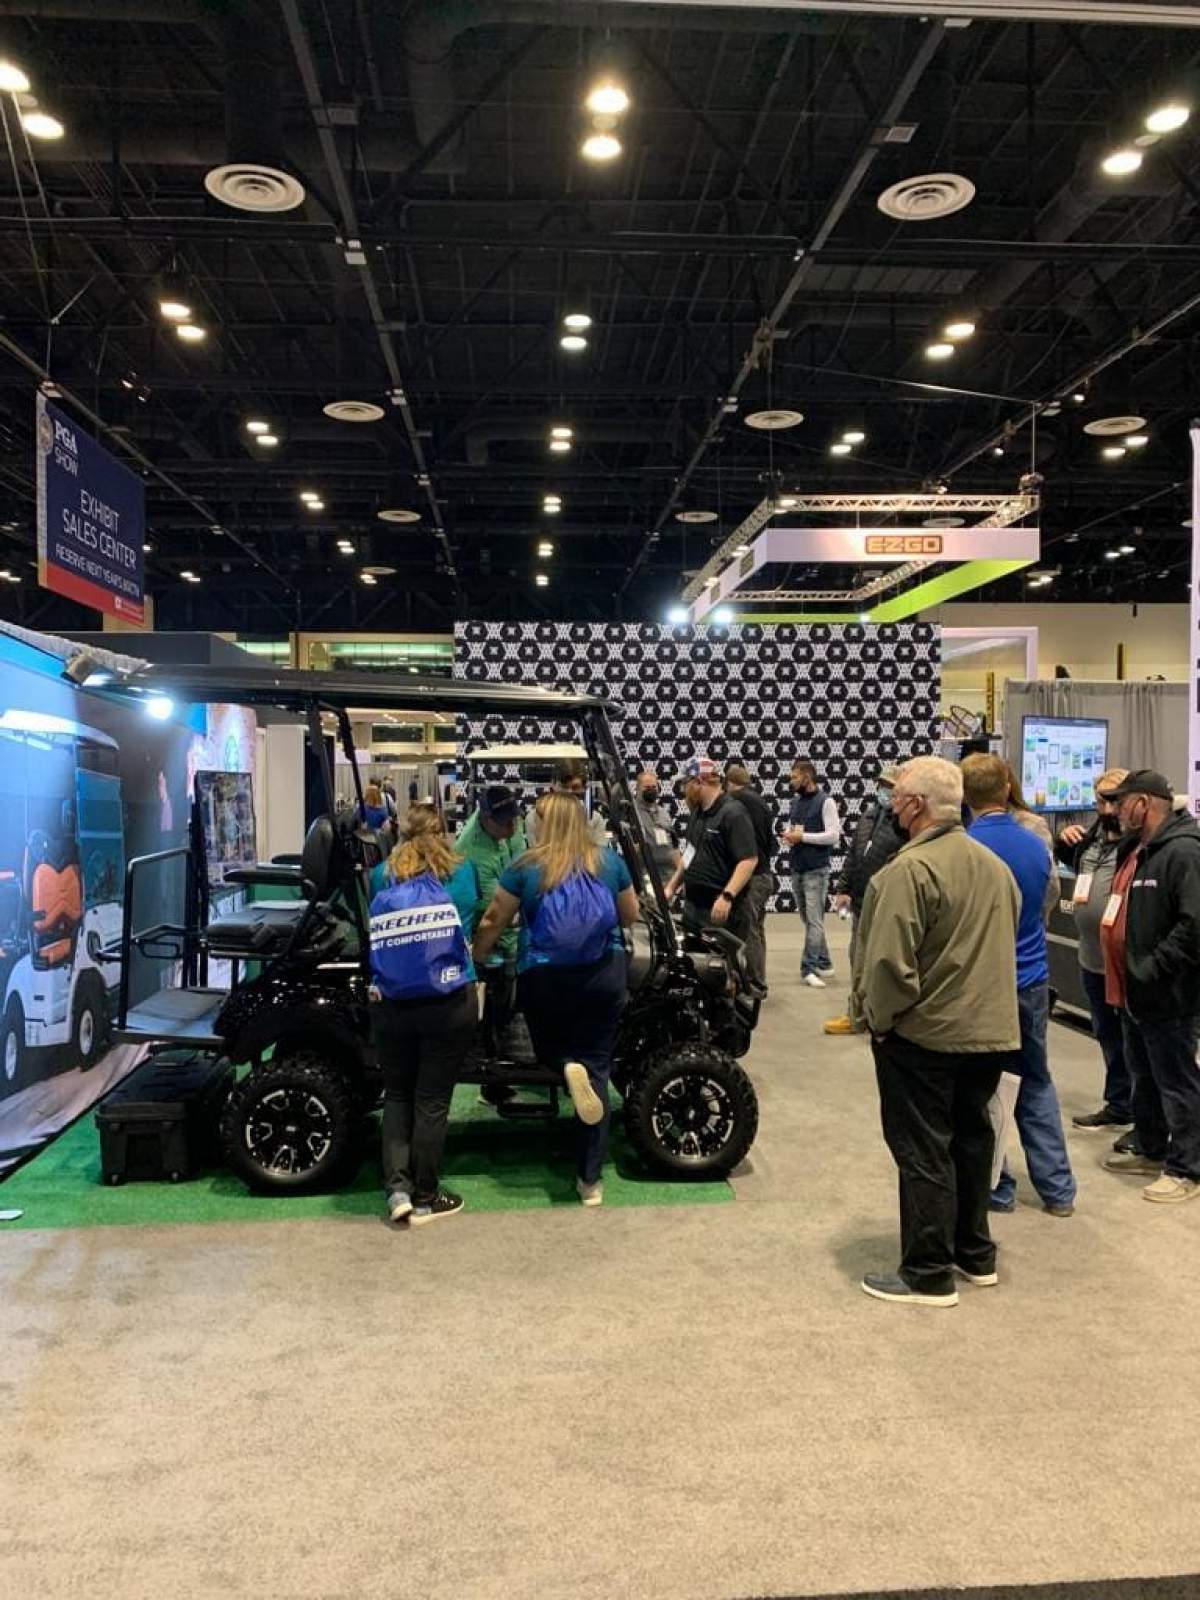 All eyes are on PILOTCAR at PGA 2022.